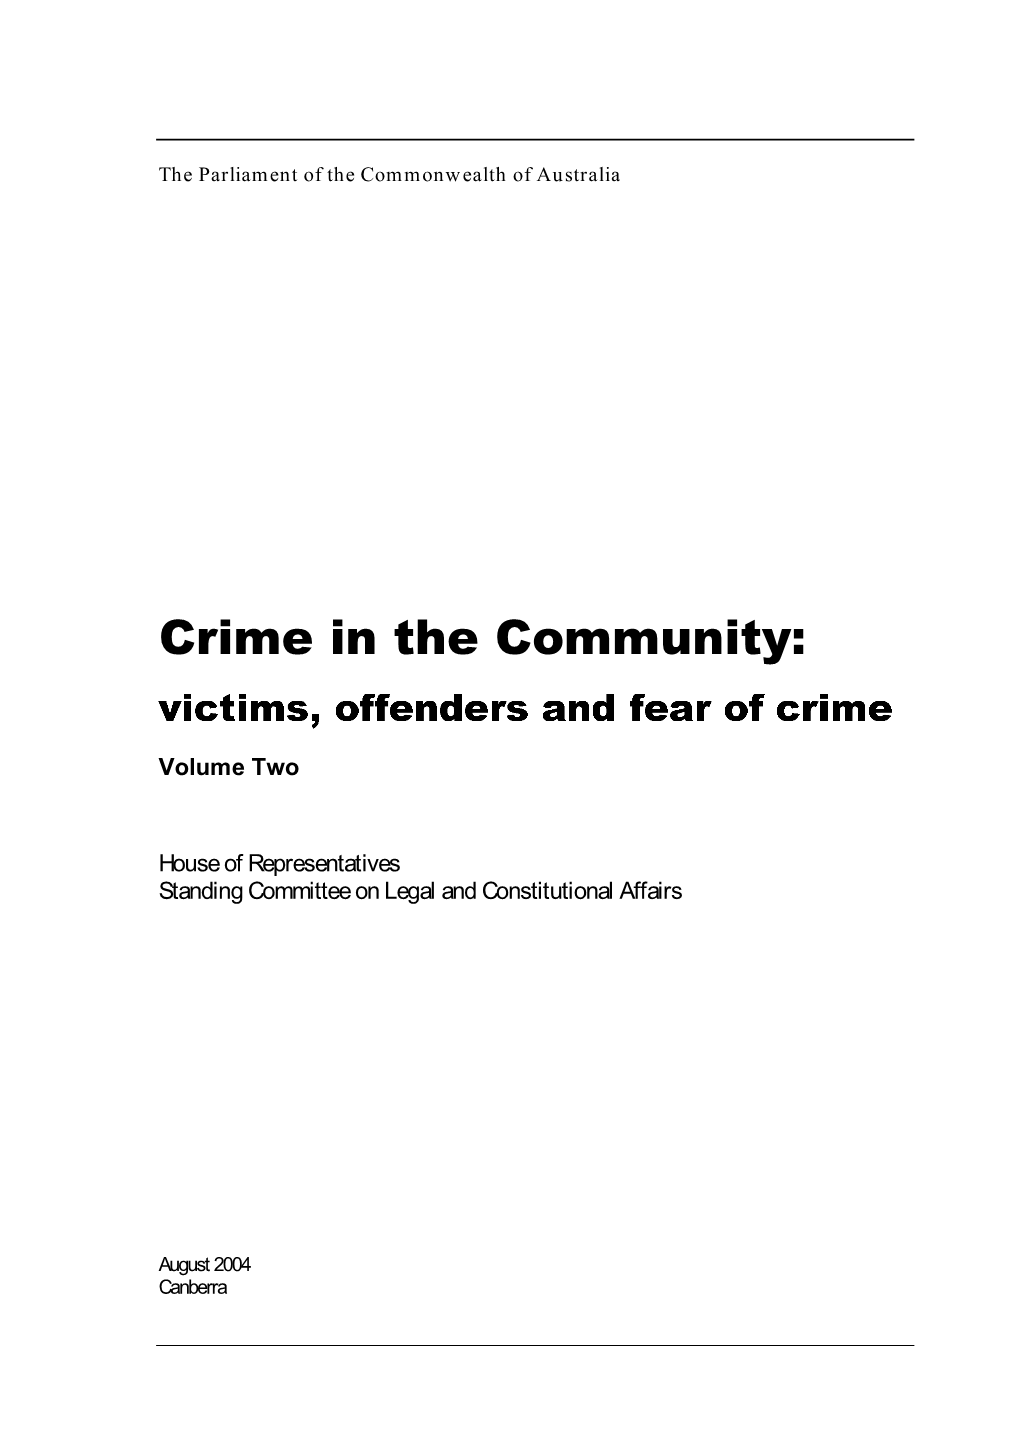 Victims, Offenders and Fear of Crime